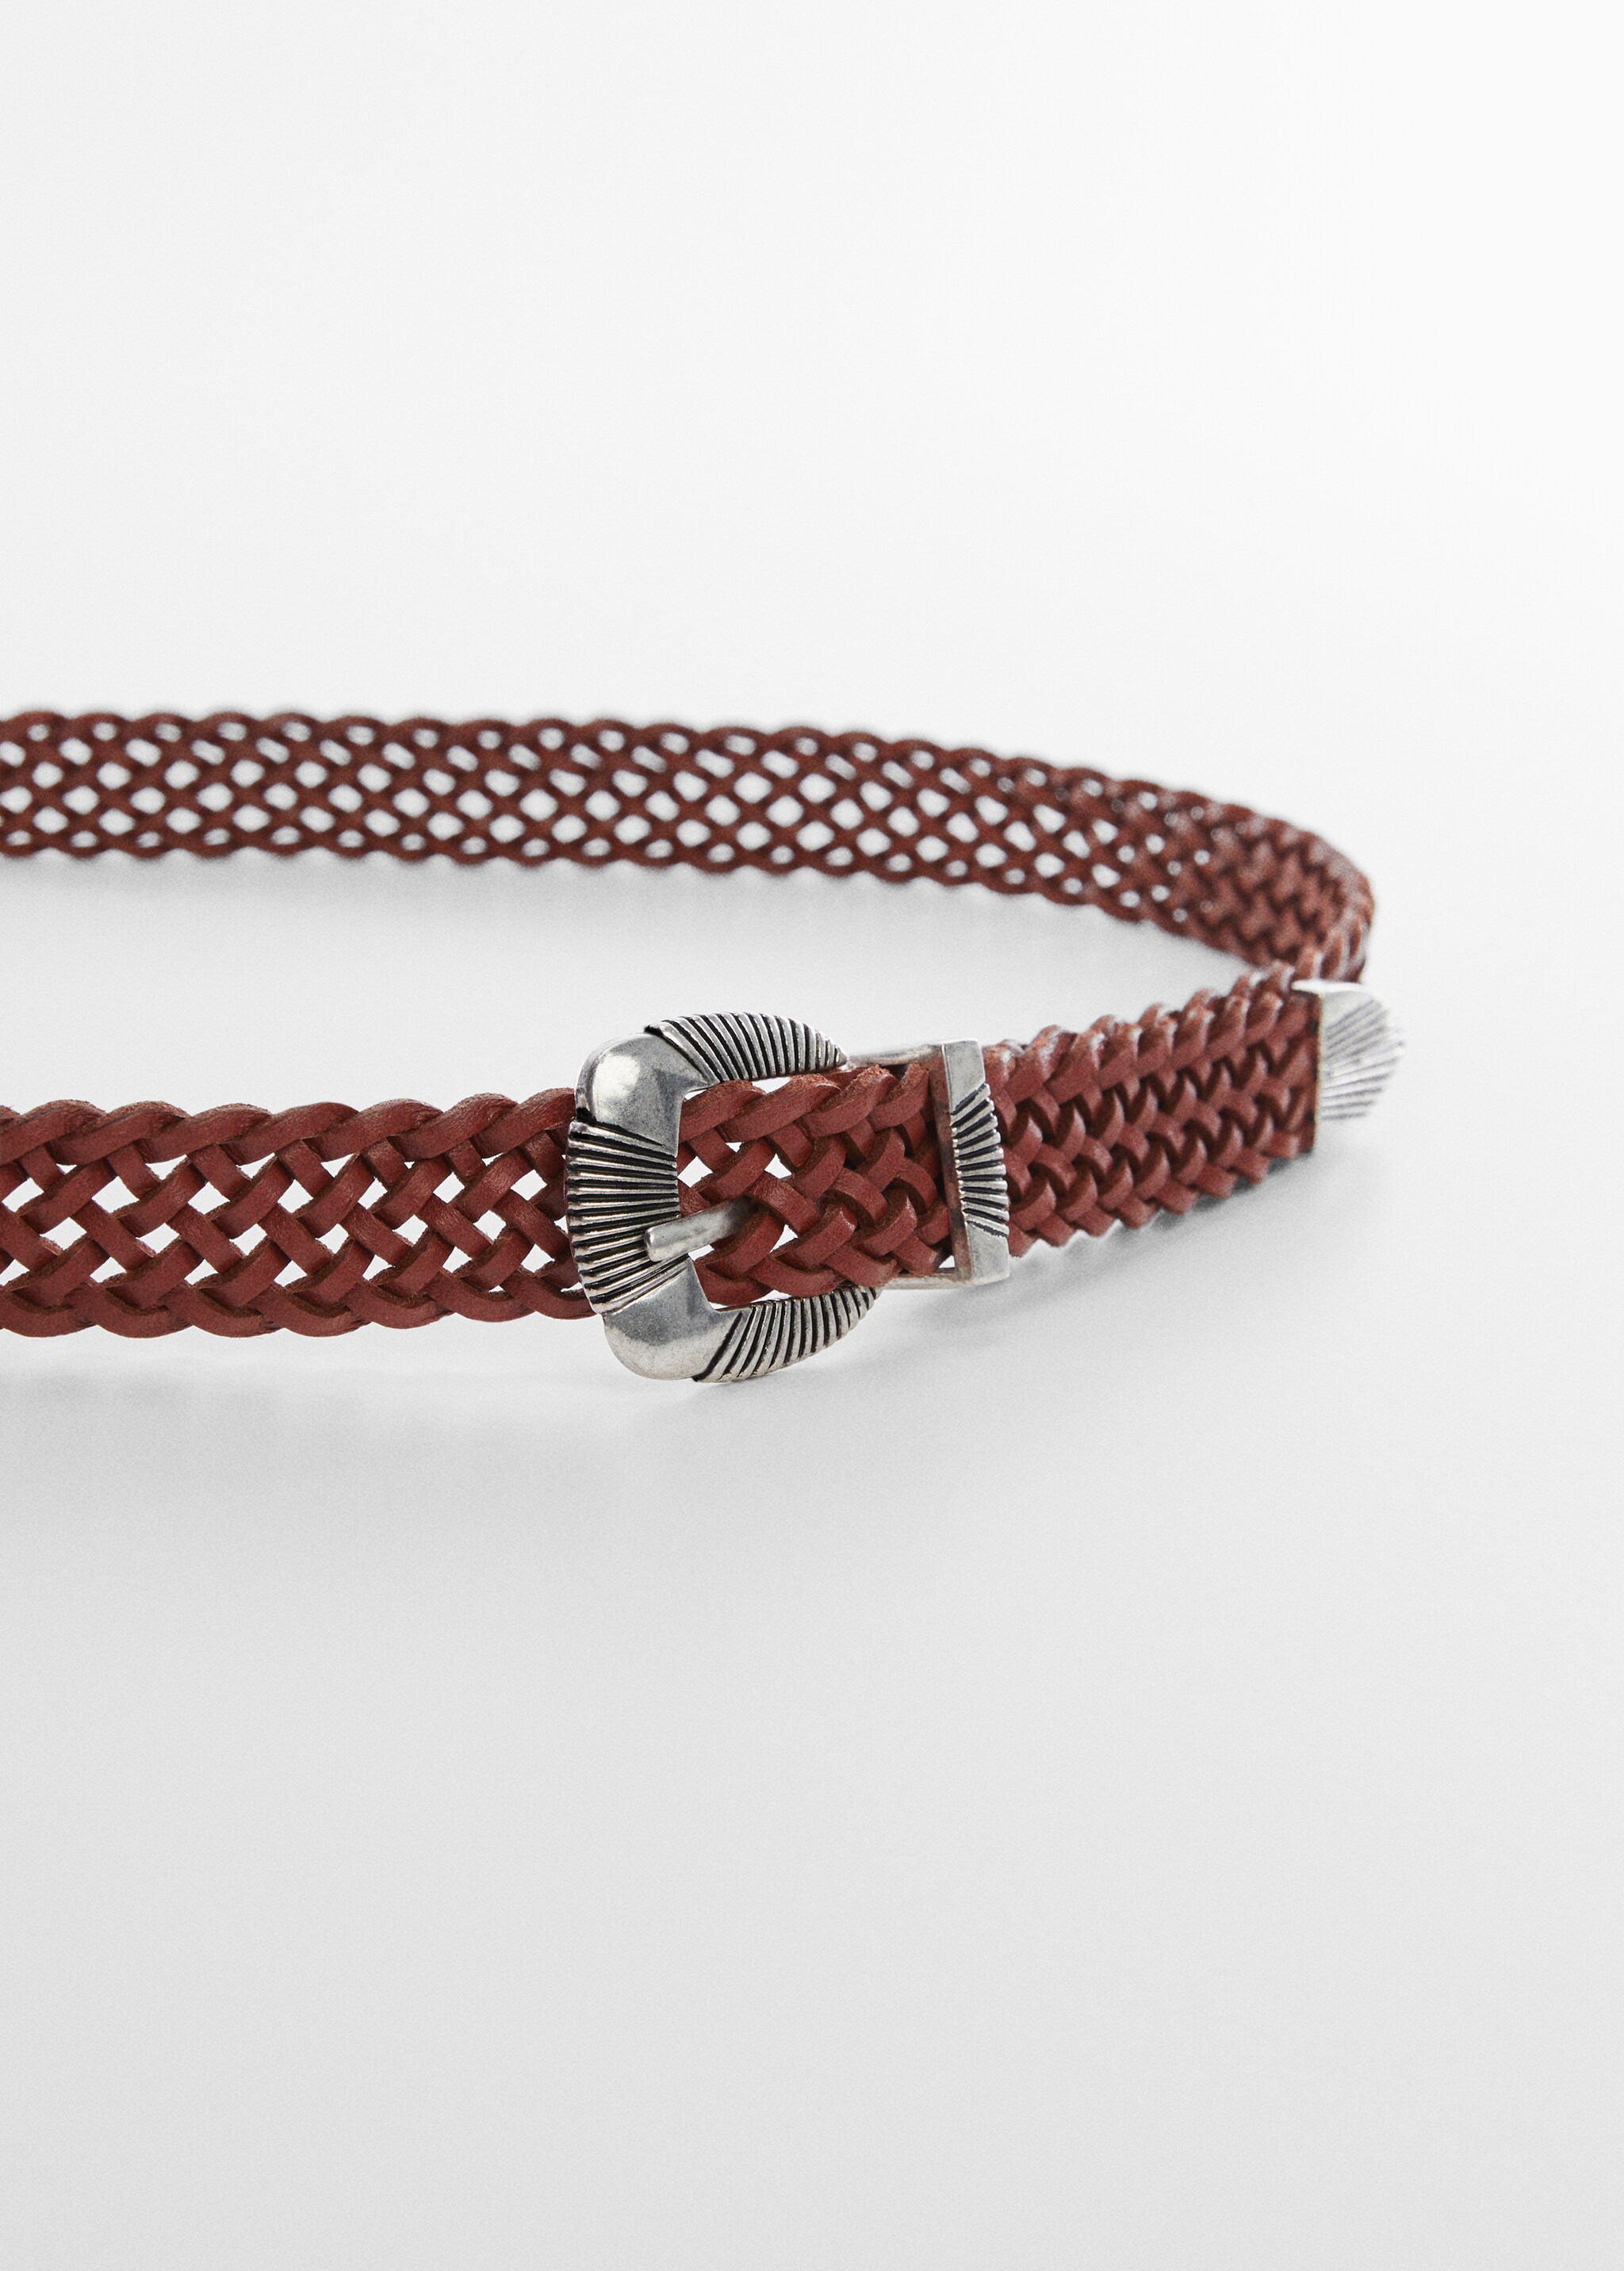 Braided leather belt - Details of the article 1